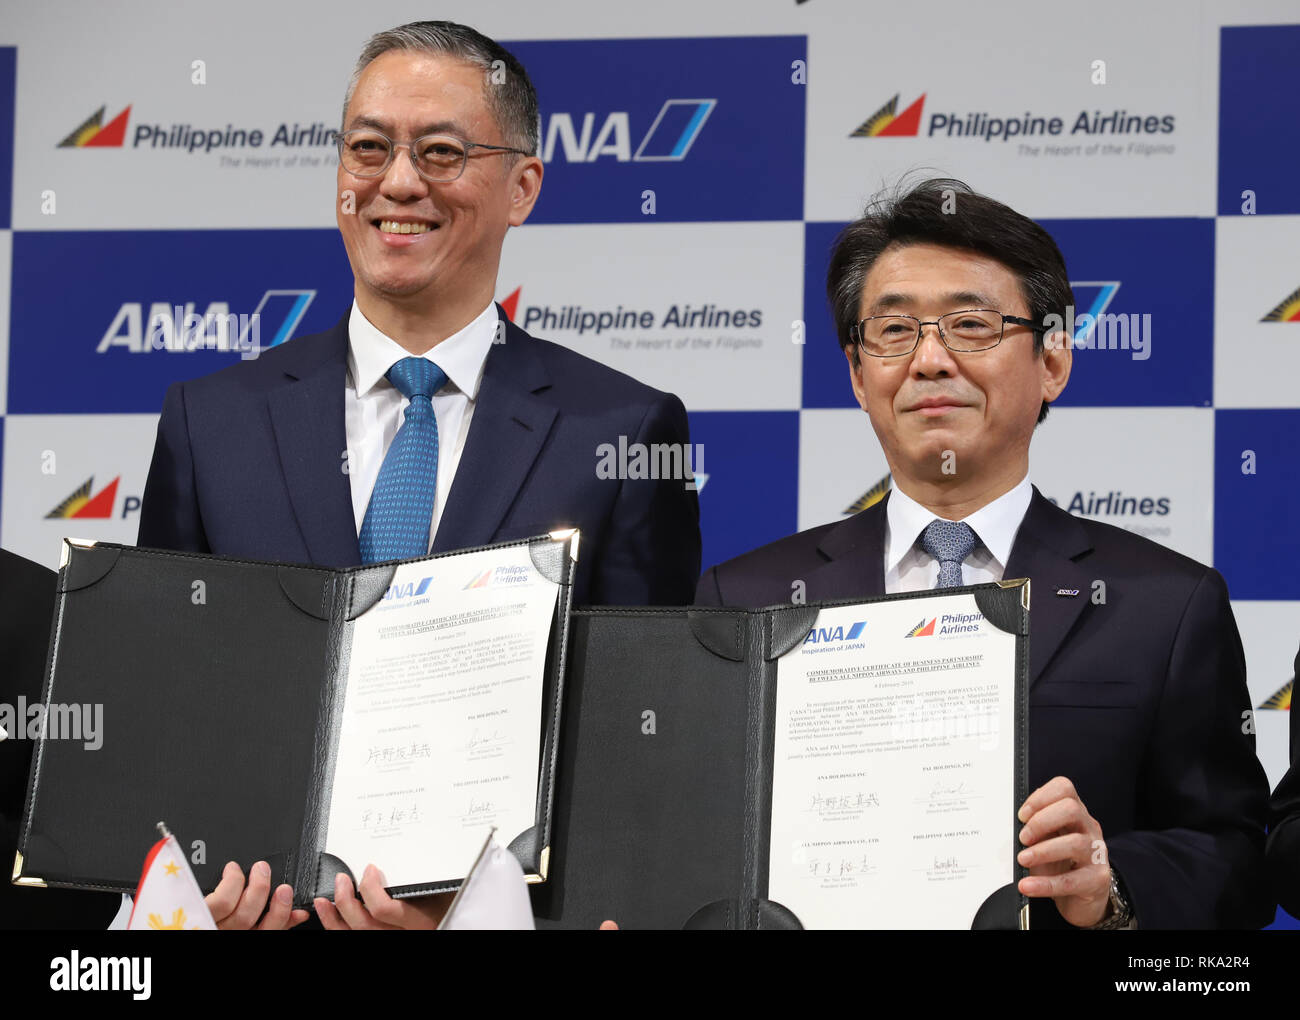 Tokyo, Japan. 8th Feb, 2019. LT Group president and PAL Holdings director Michael Tan (L) and ANA Holdings president Shinya Katanozaka show their agreement as they announce the companies expand their partnerships in Tokyo on Friday, February 8, 2019. ANA Holdings will invest 95 million U.S. dollars to PAL Holdings and acquire 9.5 percent of PAL Holdings shares. Credit: Yoshio Tsunoda/AFLO/Alamy Live News Stock Photo